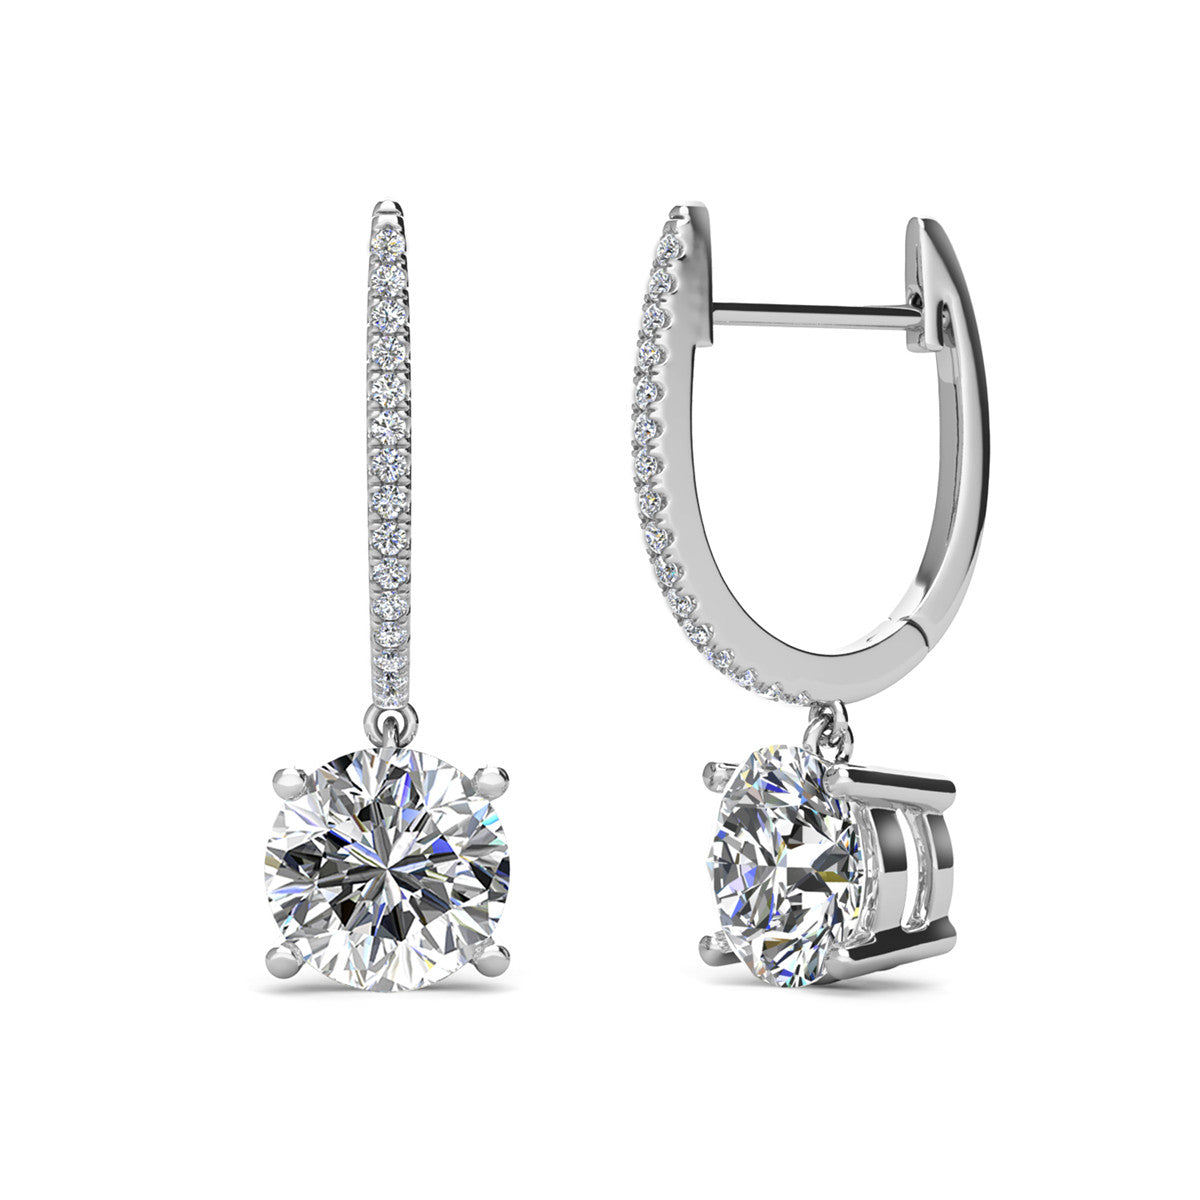 Moissanite by Cate & Chloe Finley Sterling Silver Drop Earrings with Moissanite and 5A Cubic Zirconia Crystals